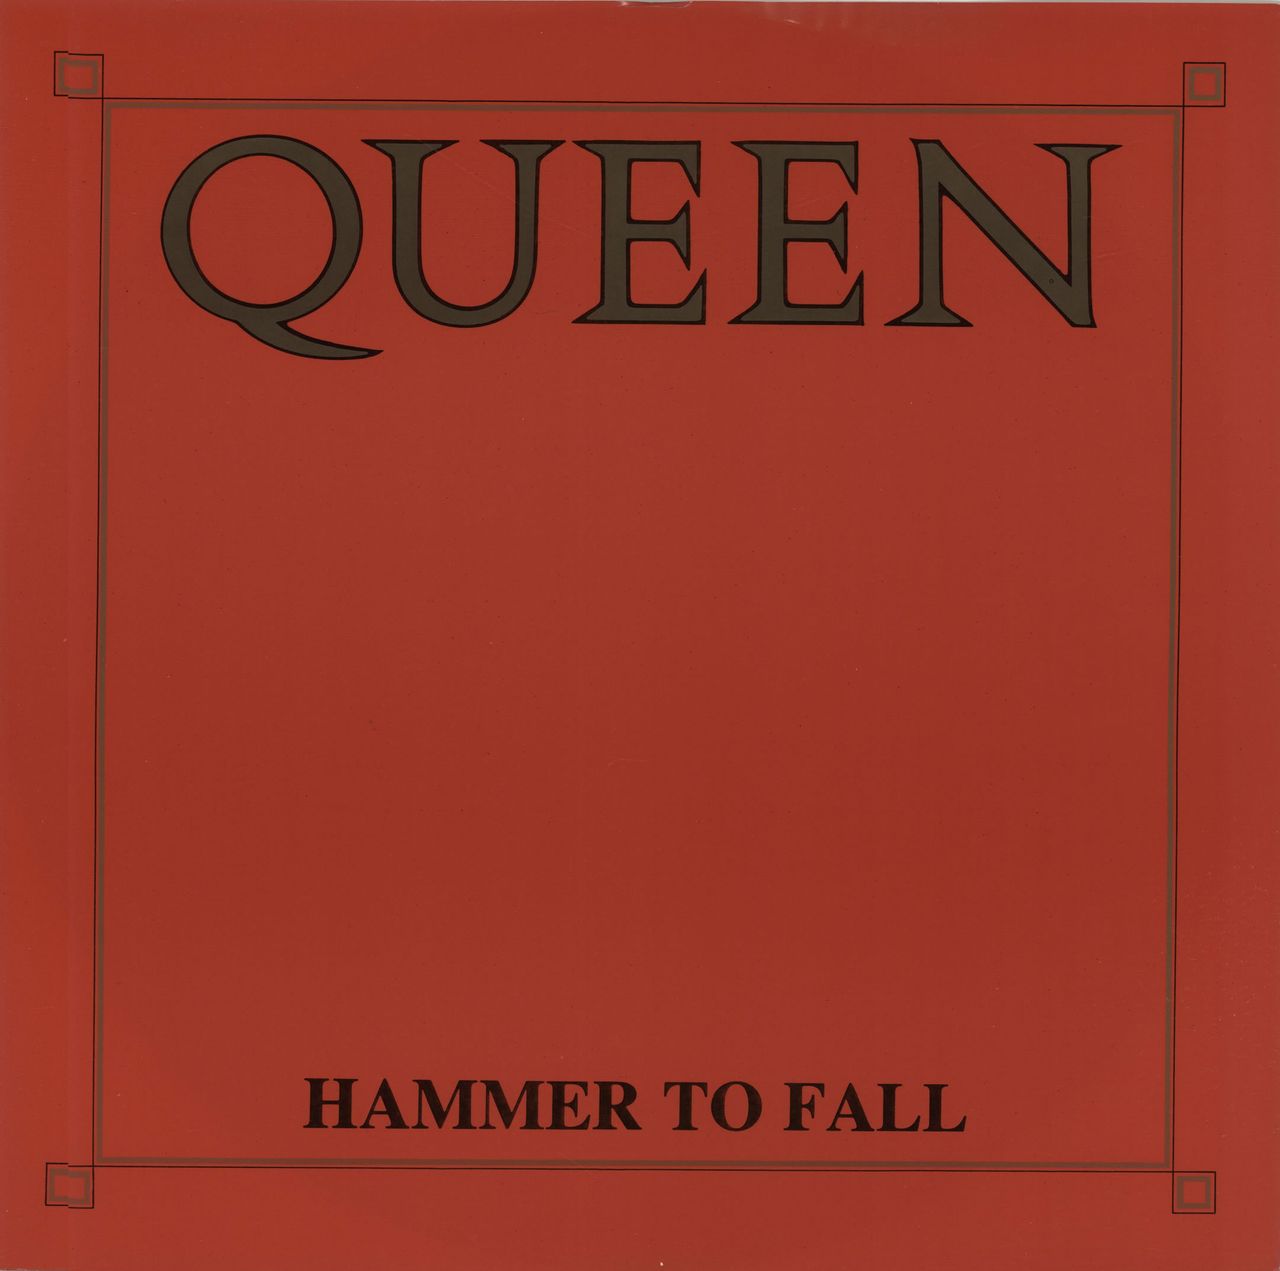 Queen Hammer To Fall - Red Sleeve UK 12" vinyl single (12 inch record / Maxi-single) 12QUEEN4